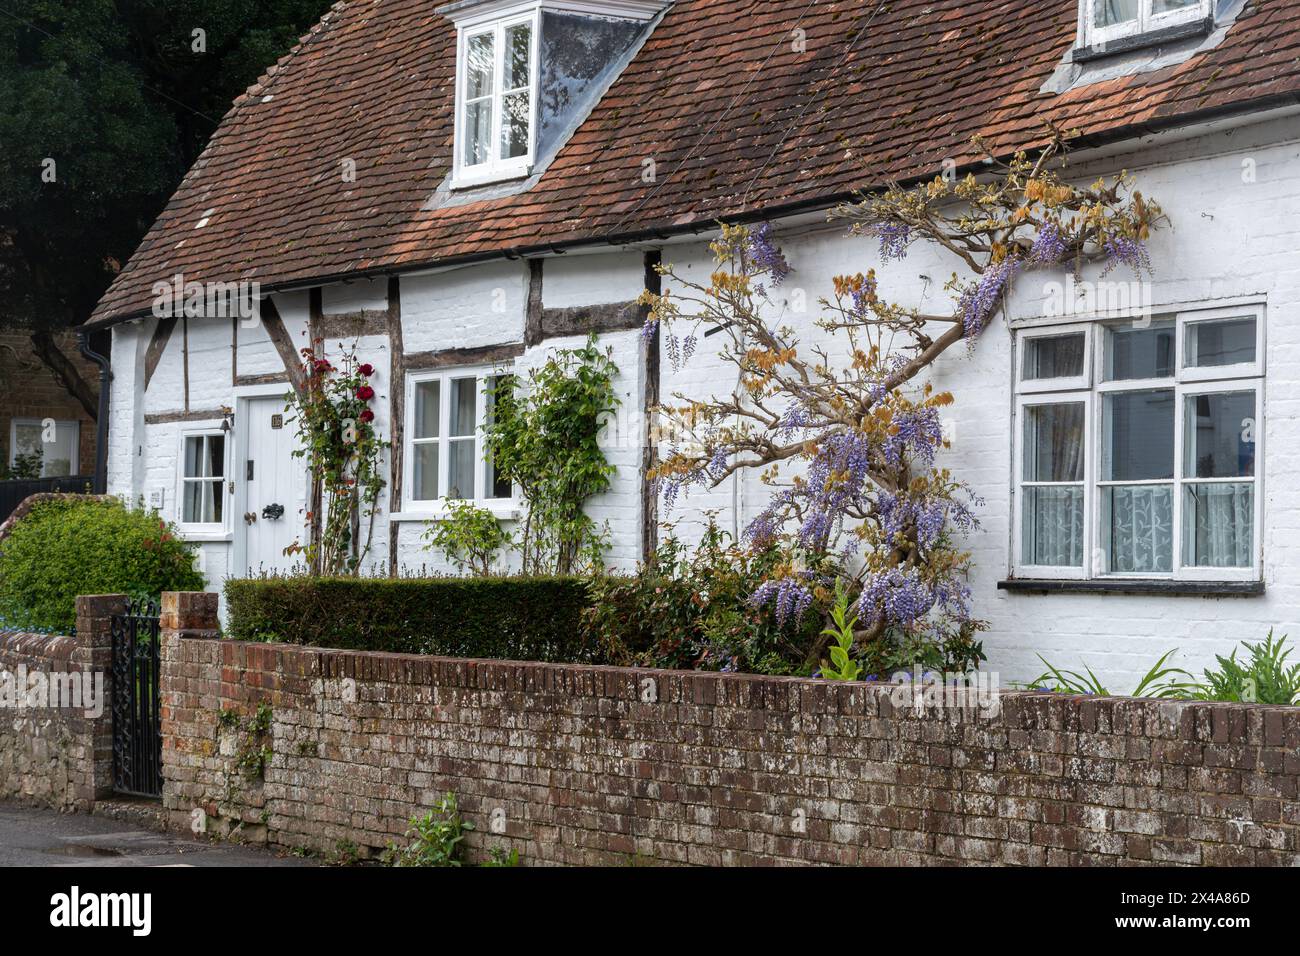 Cottage with wisteria growing up the wall with mauve flowers in spring or April, Holybourne village, Hampshire, England, UK Stock Photo